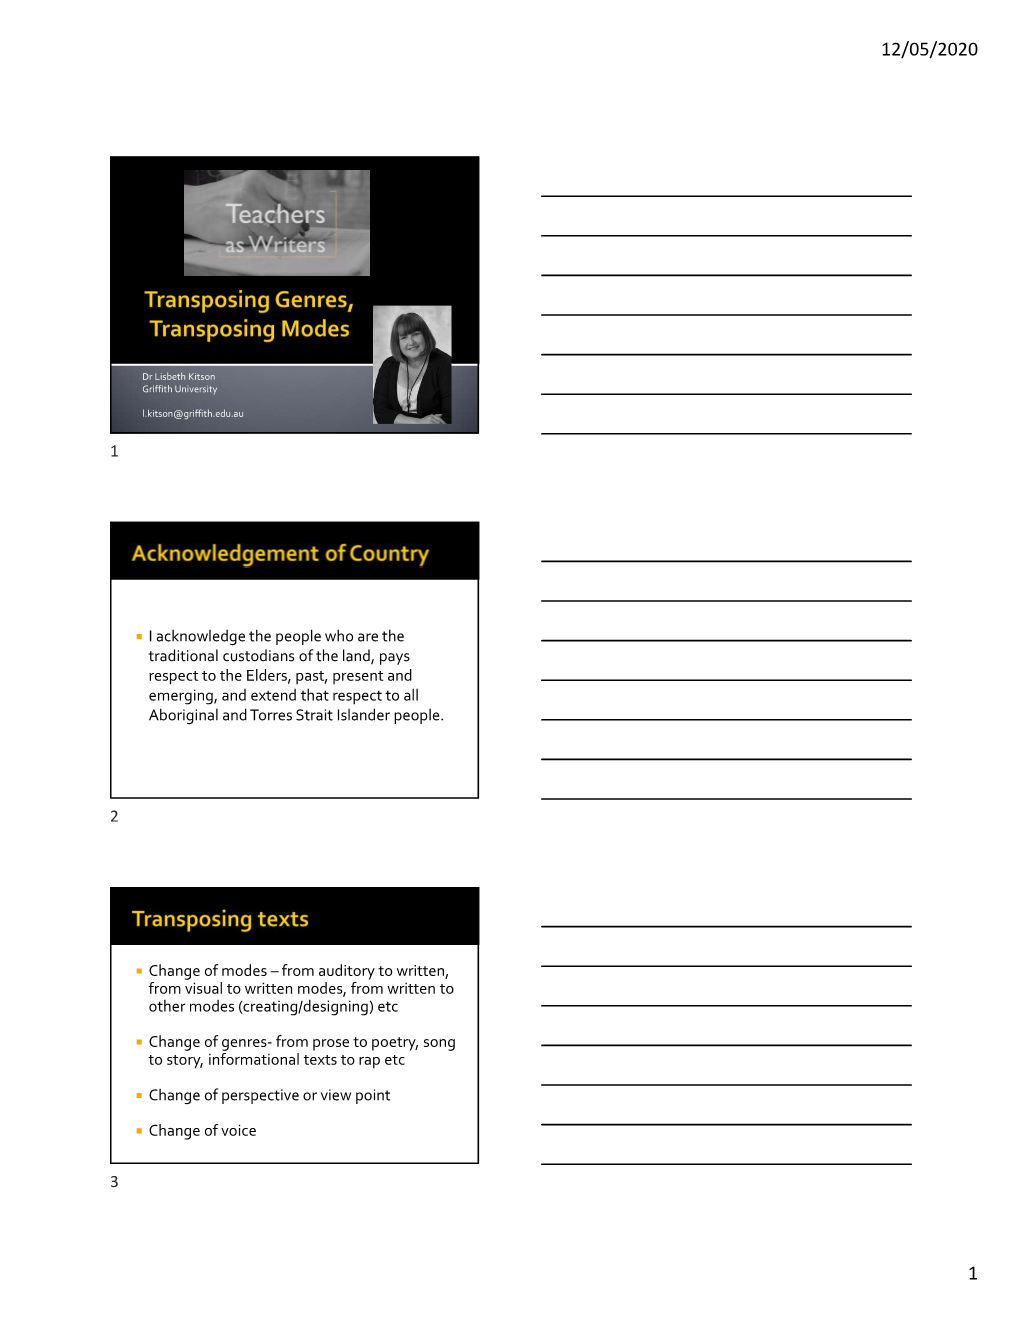 Transposing Genres and Modes Powerpoint